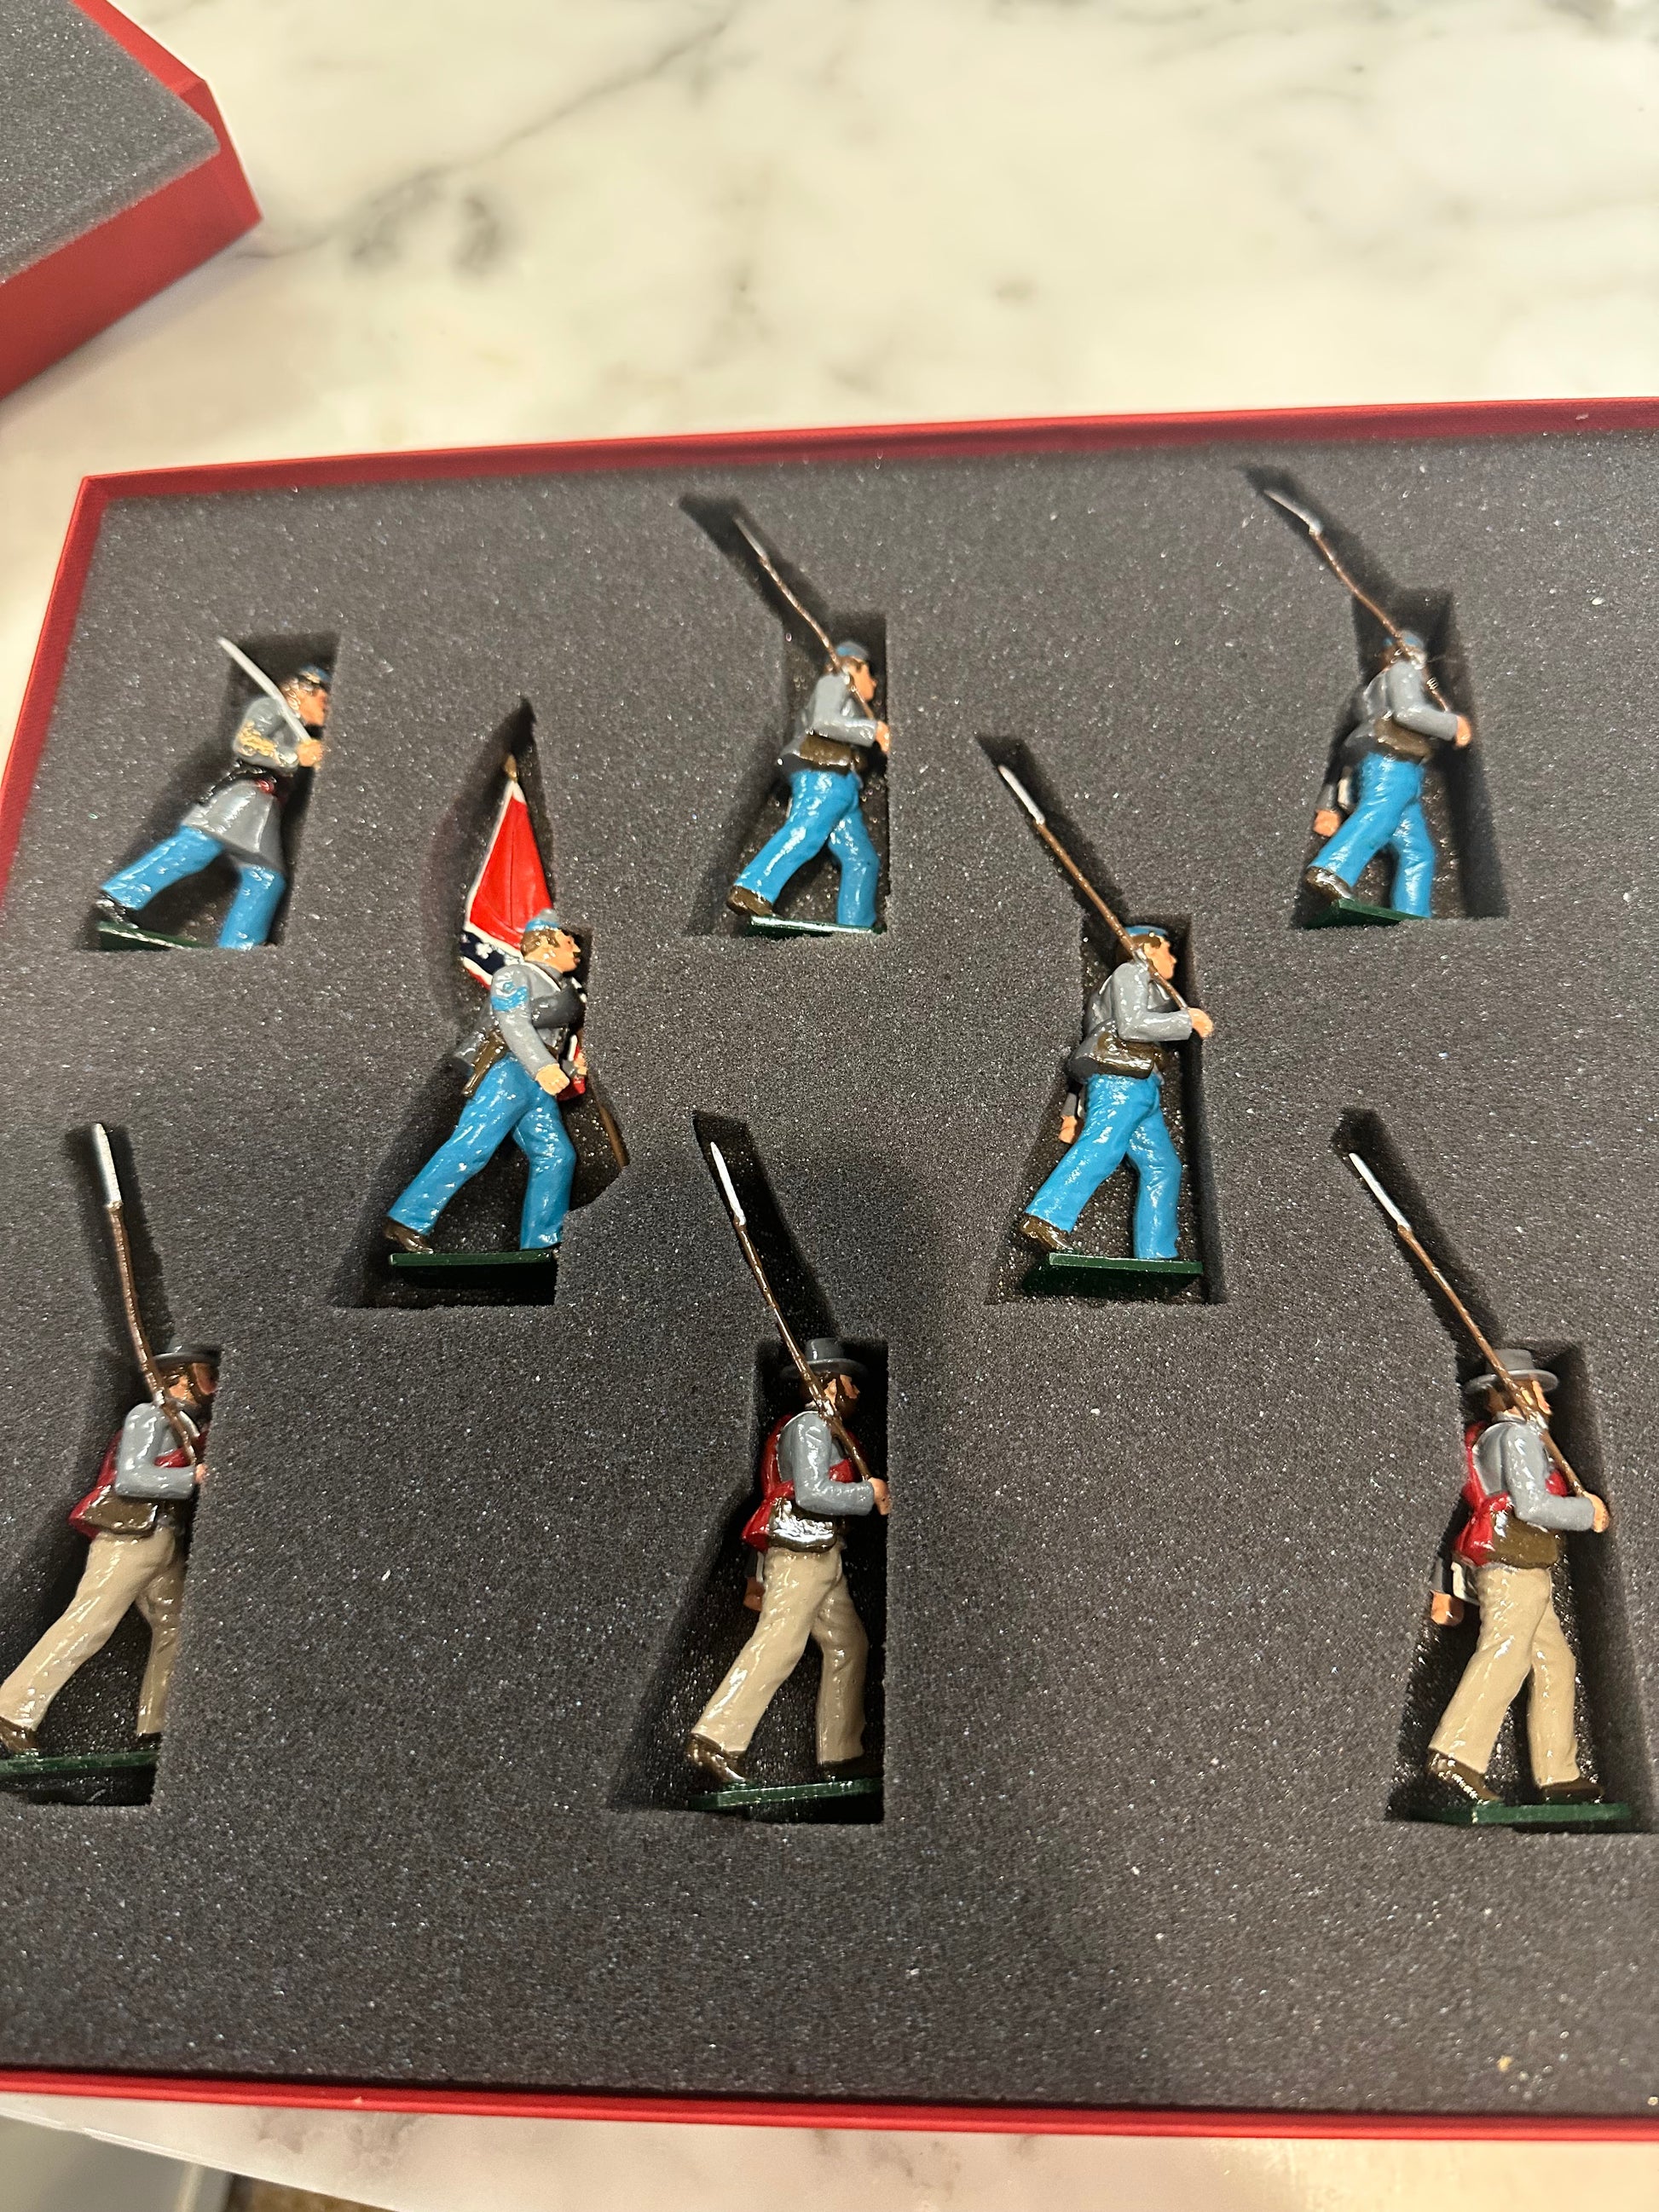 Toy soldier set confederate marching with flag packed in classical tradition red box.